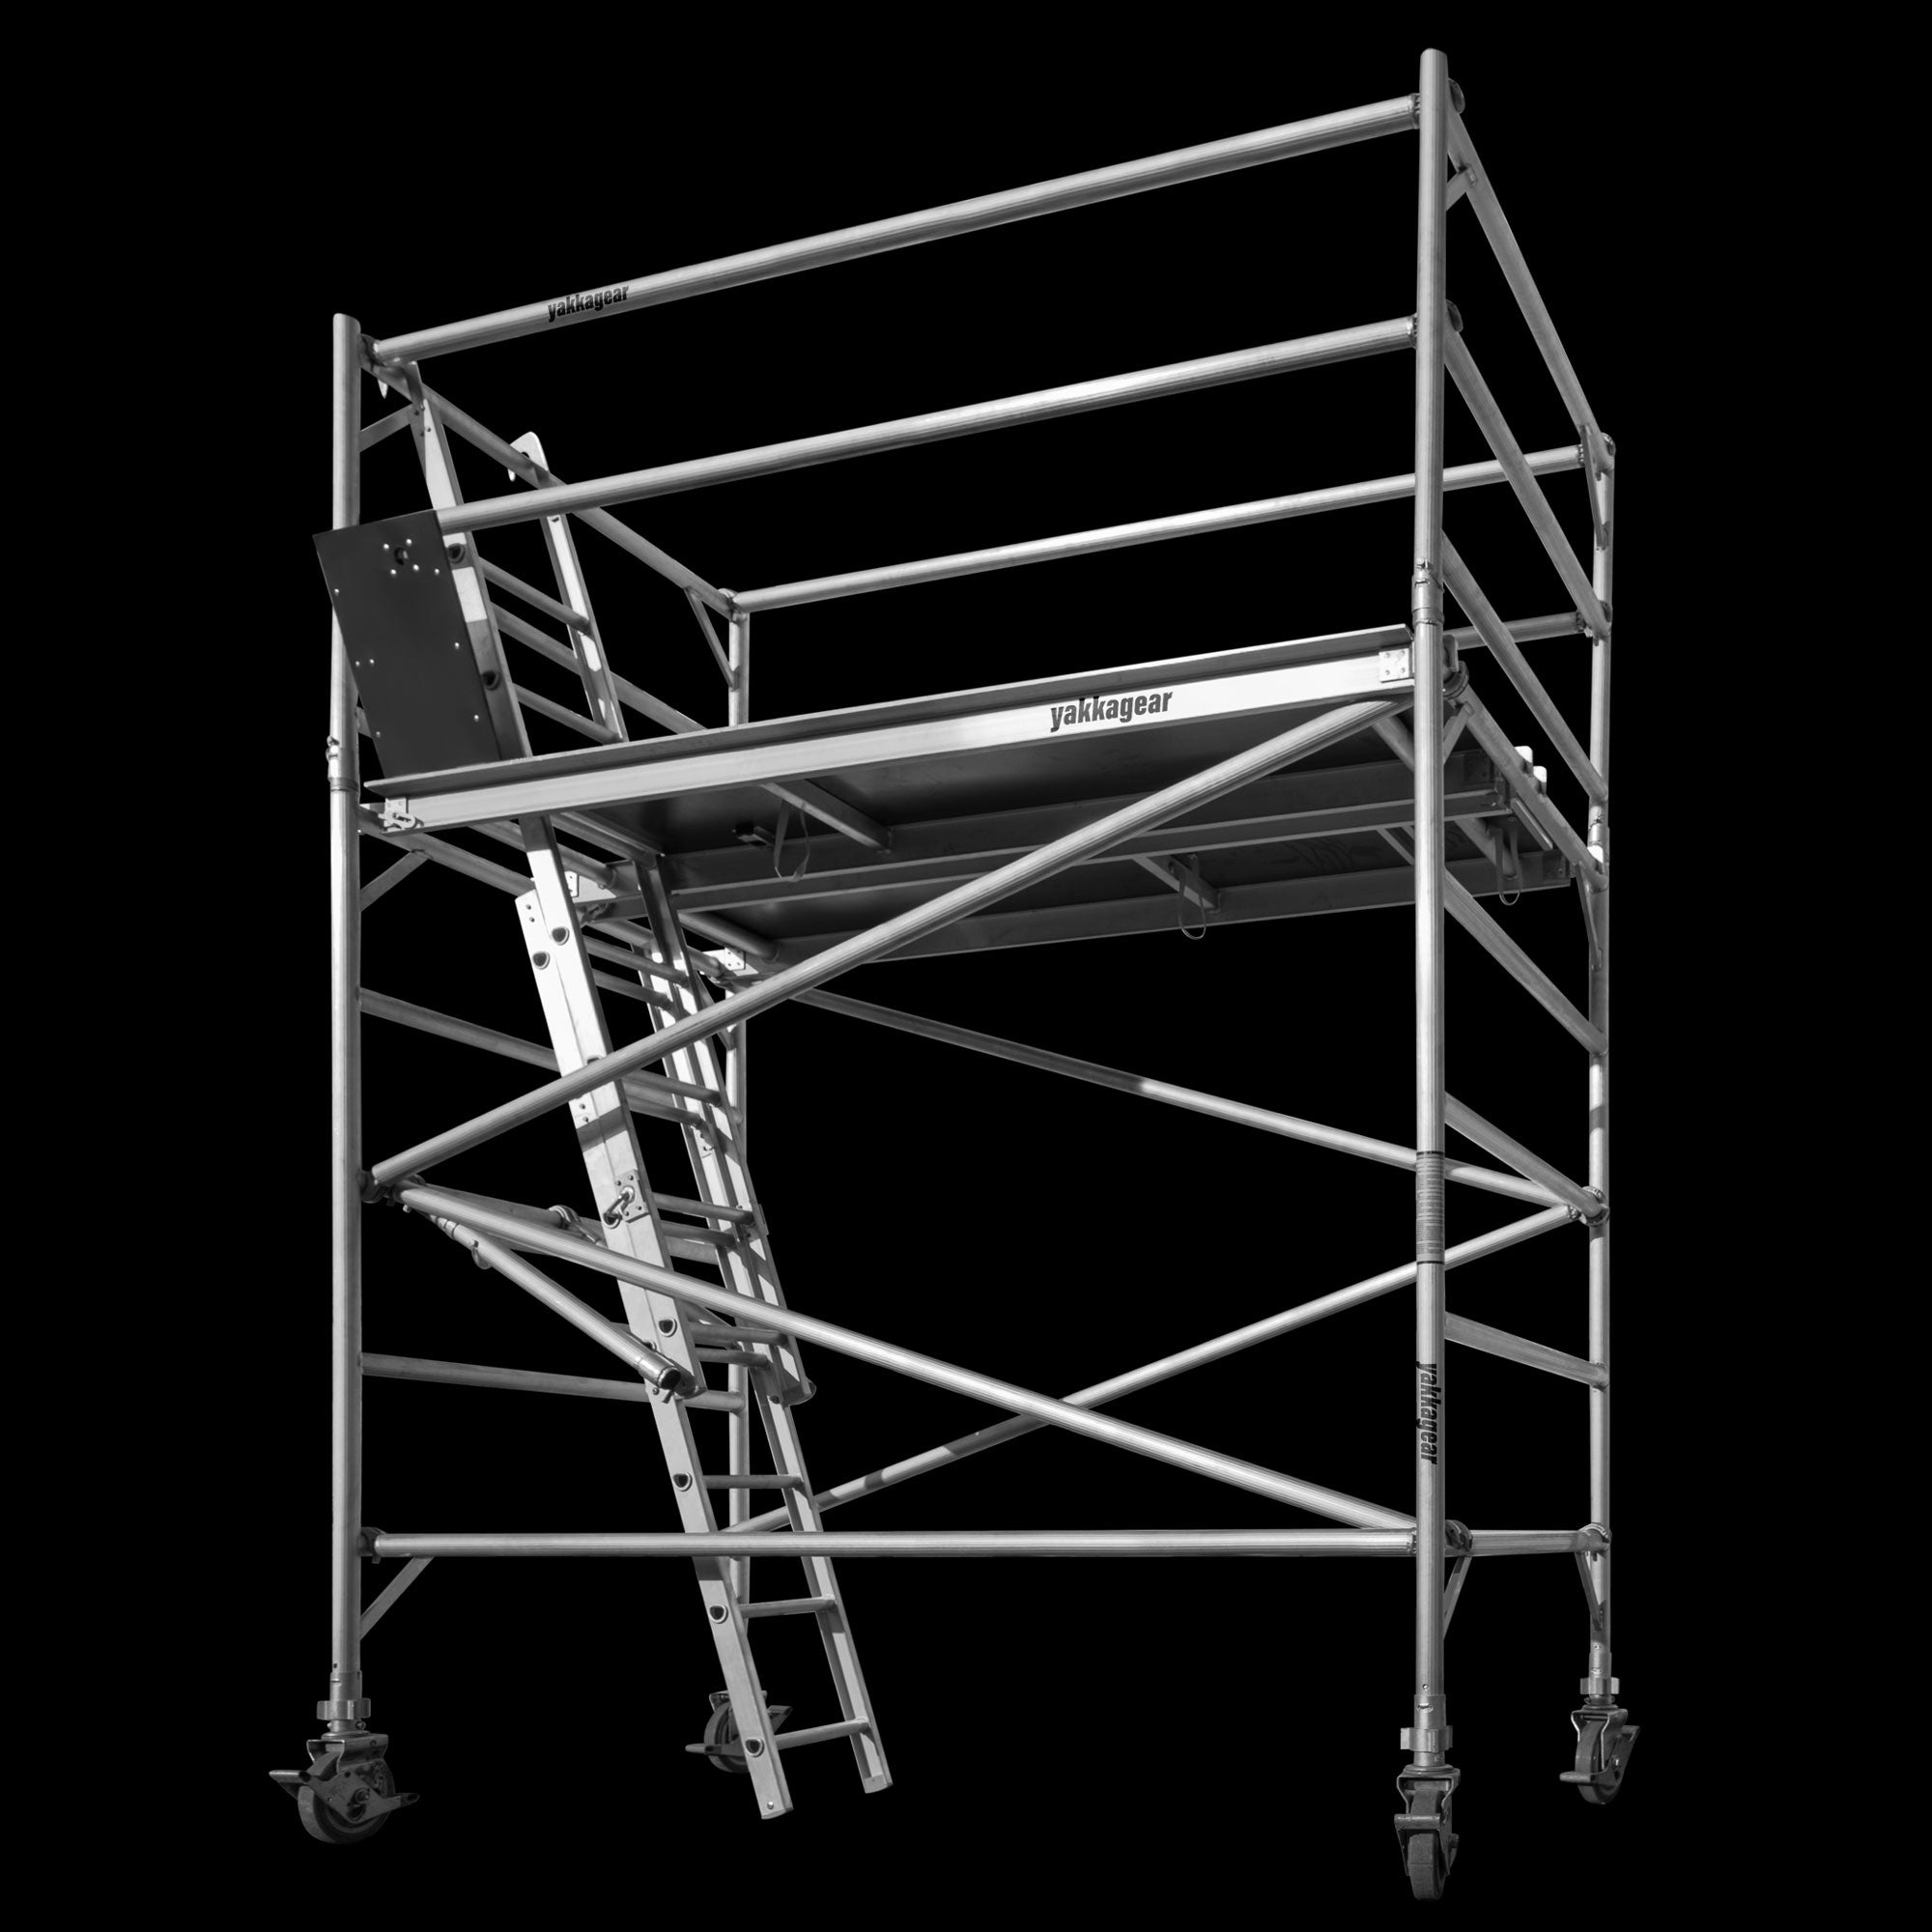 Yakka Gear Australia 2.5m Length 1.3m Wide 4.6m reach wide scaffolding tower access equipment with working height of 2.6m, view from the front side angle.